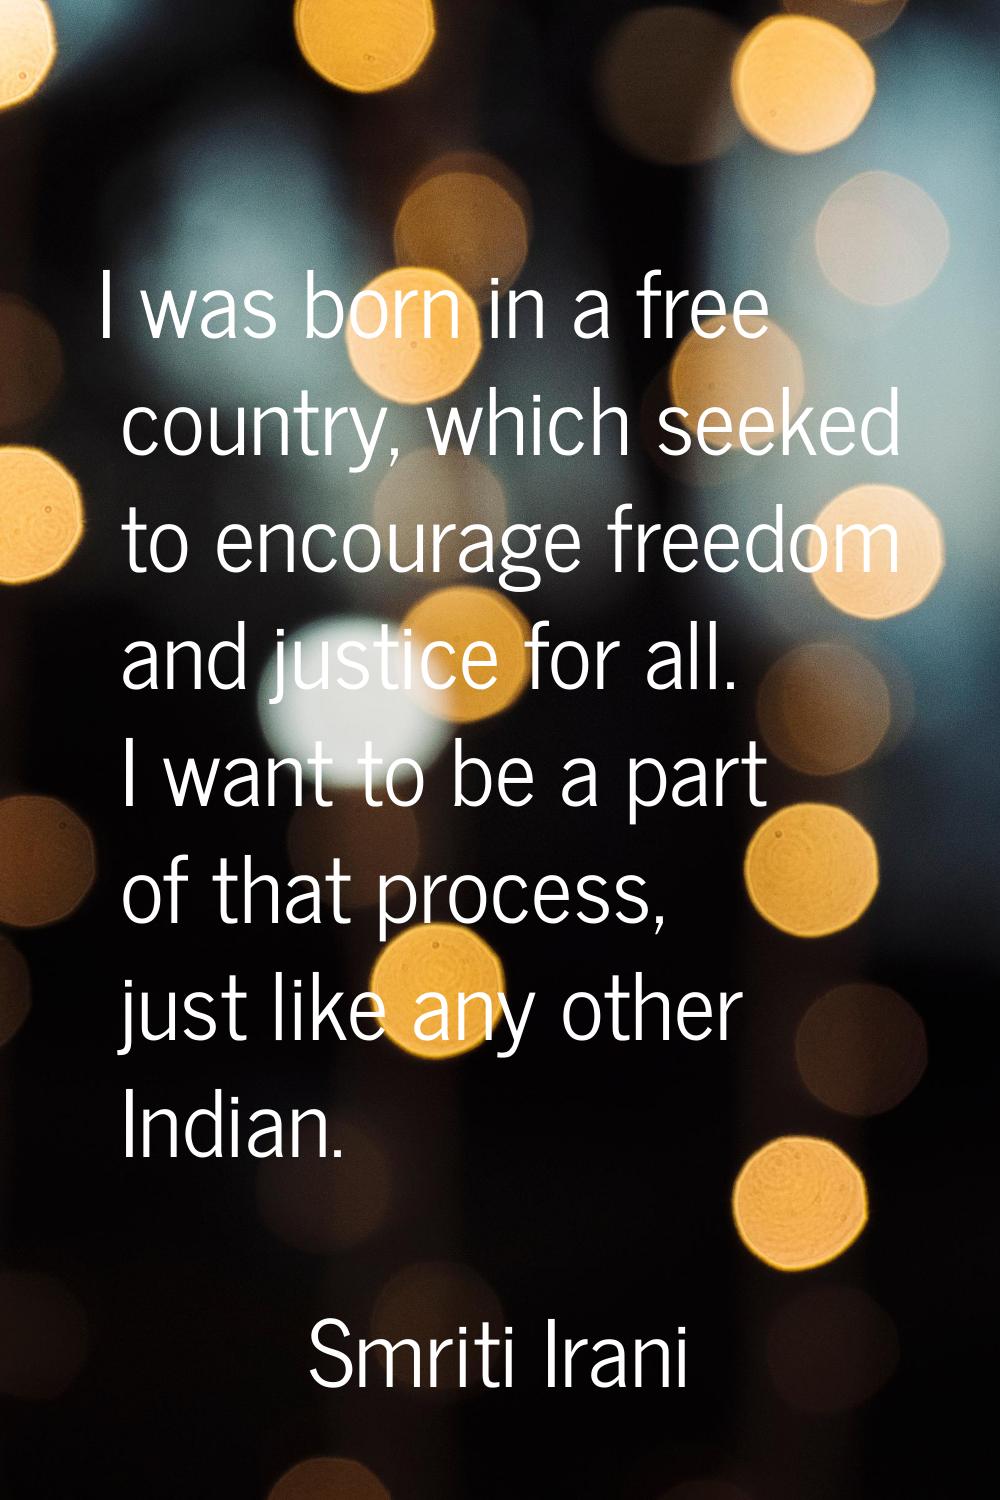 I was born in a free country, which seeked to encourage freedom and justice for all. I want to be a